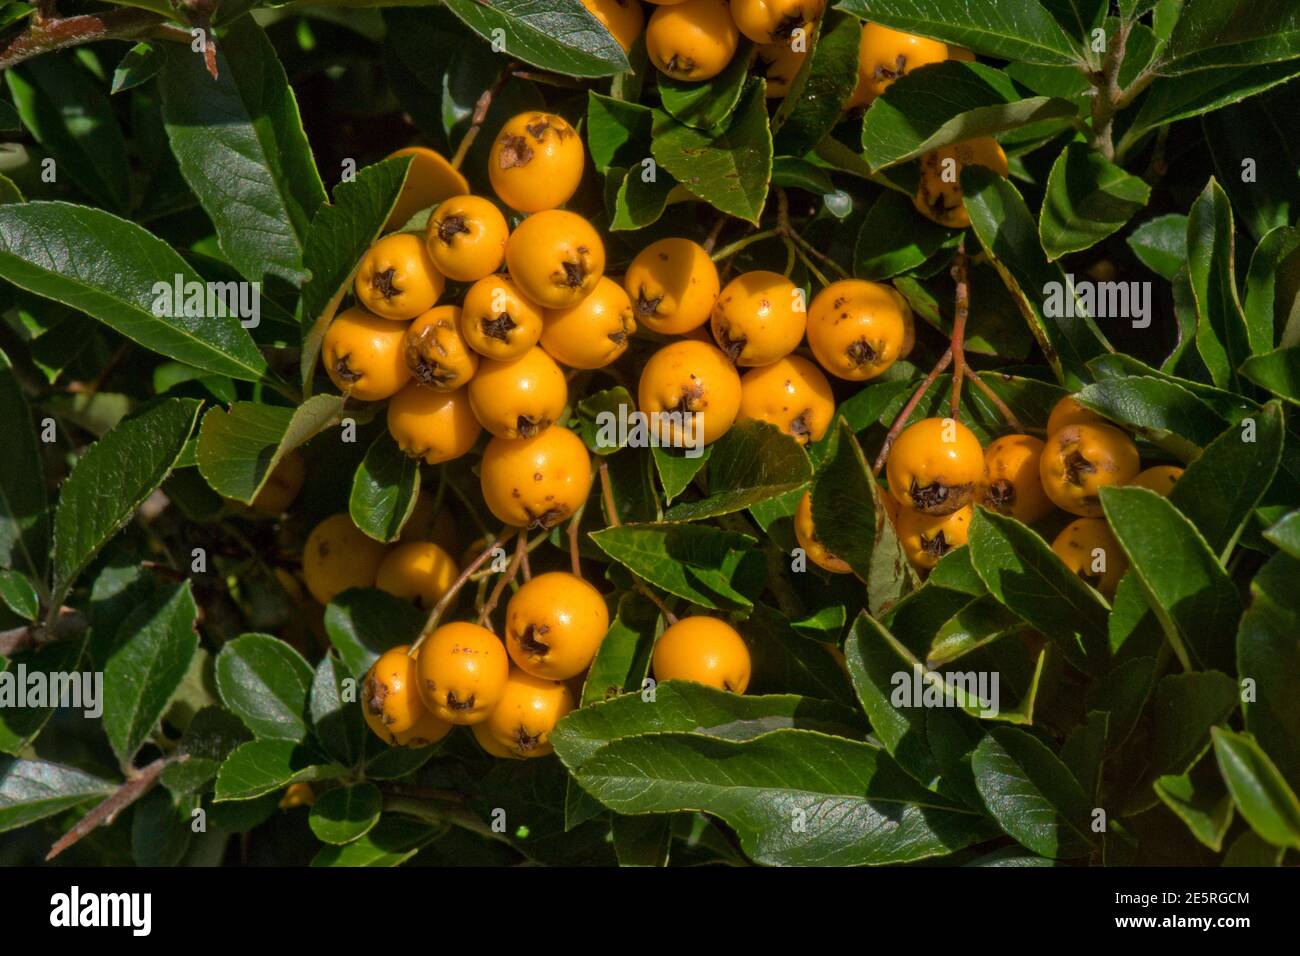 Orange round berries or pomes of narrowleaf firethorn (Pyracantha angustifolia) in late summer, Berkshire, September Stock Photo